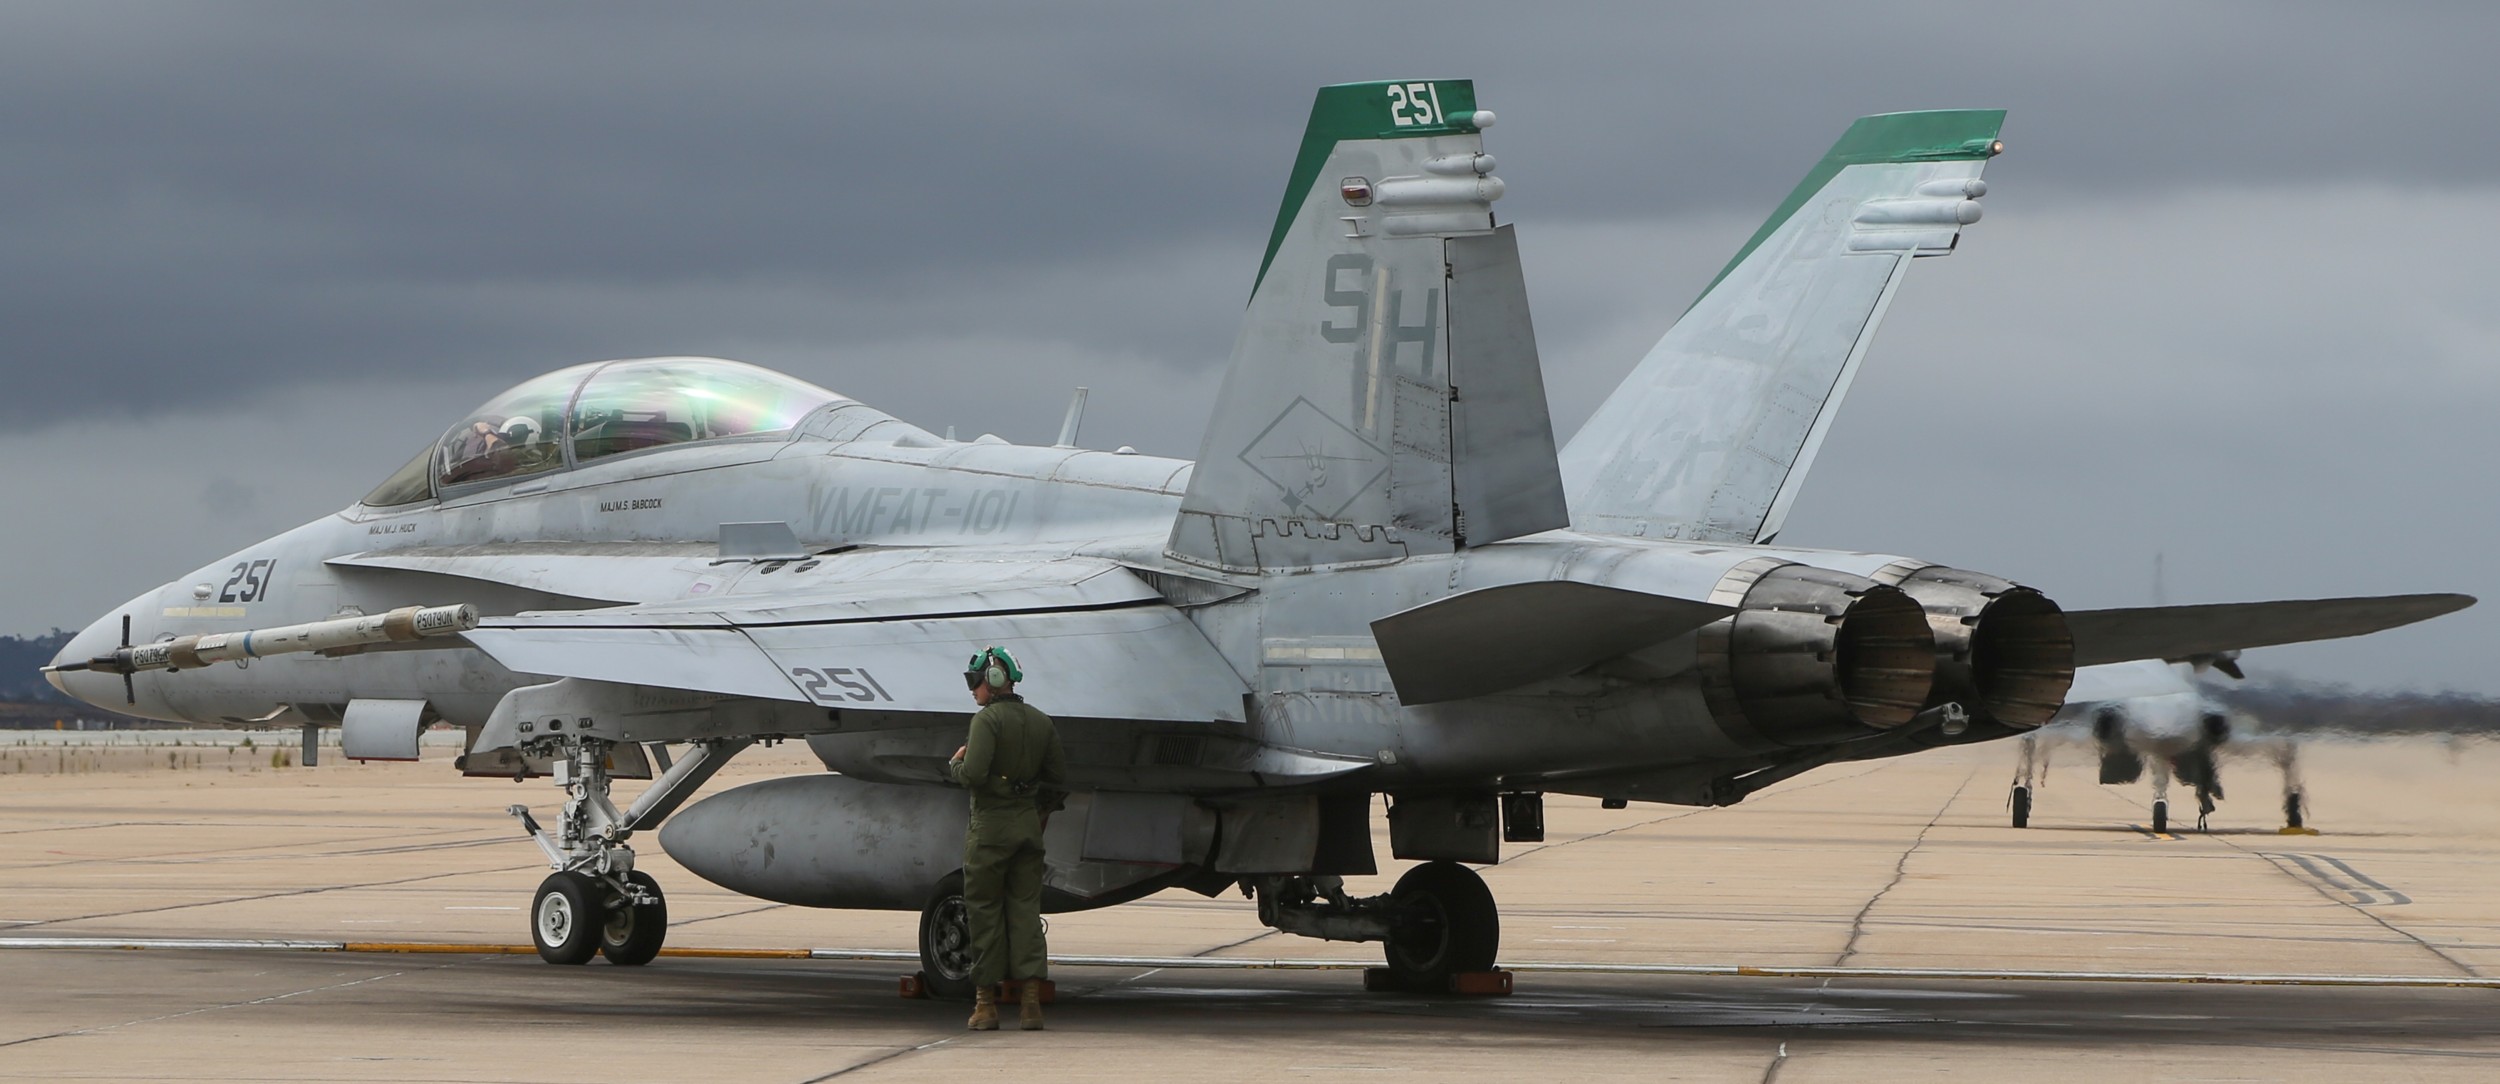 vmfat-101 sharpshooters marine fighter attack squadron usmc f/a-18 hornet replacement 104 mcas miramar